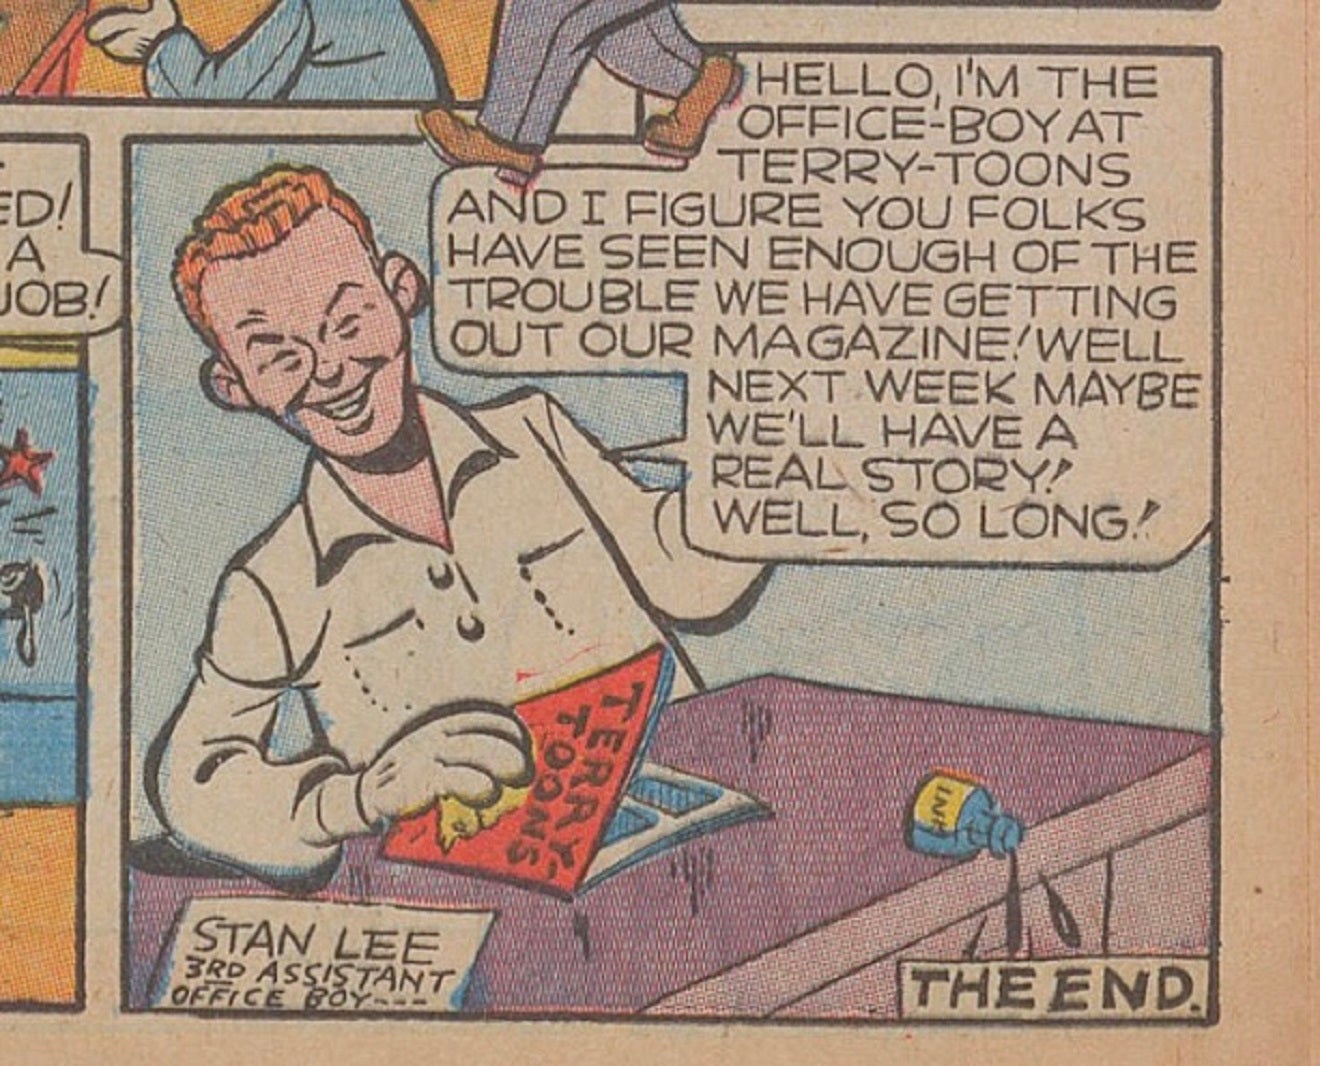 Image of a young Stan Lee introducing himself as Office-Boy at Terry-Toons